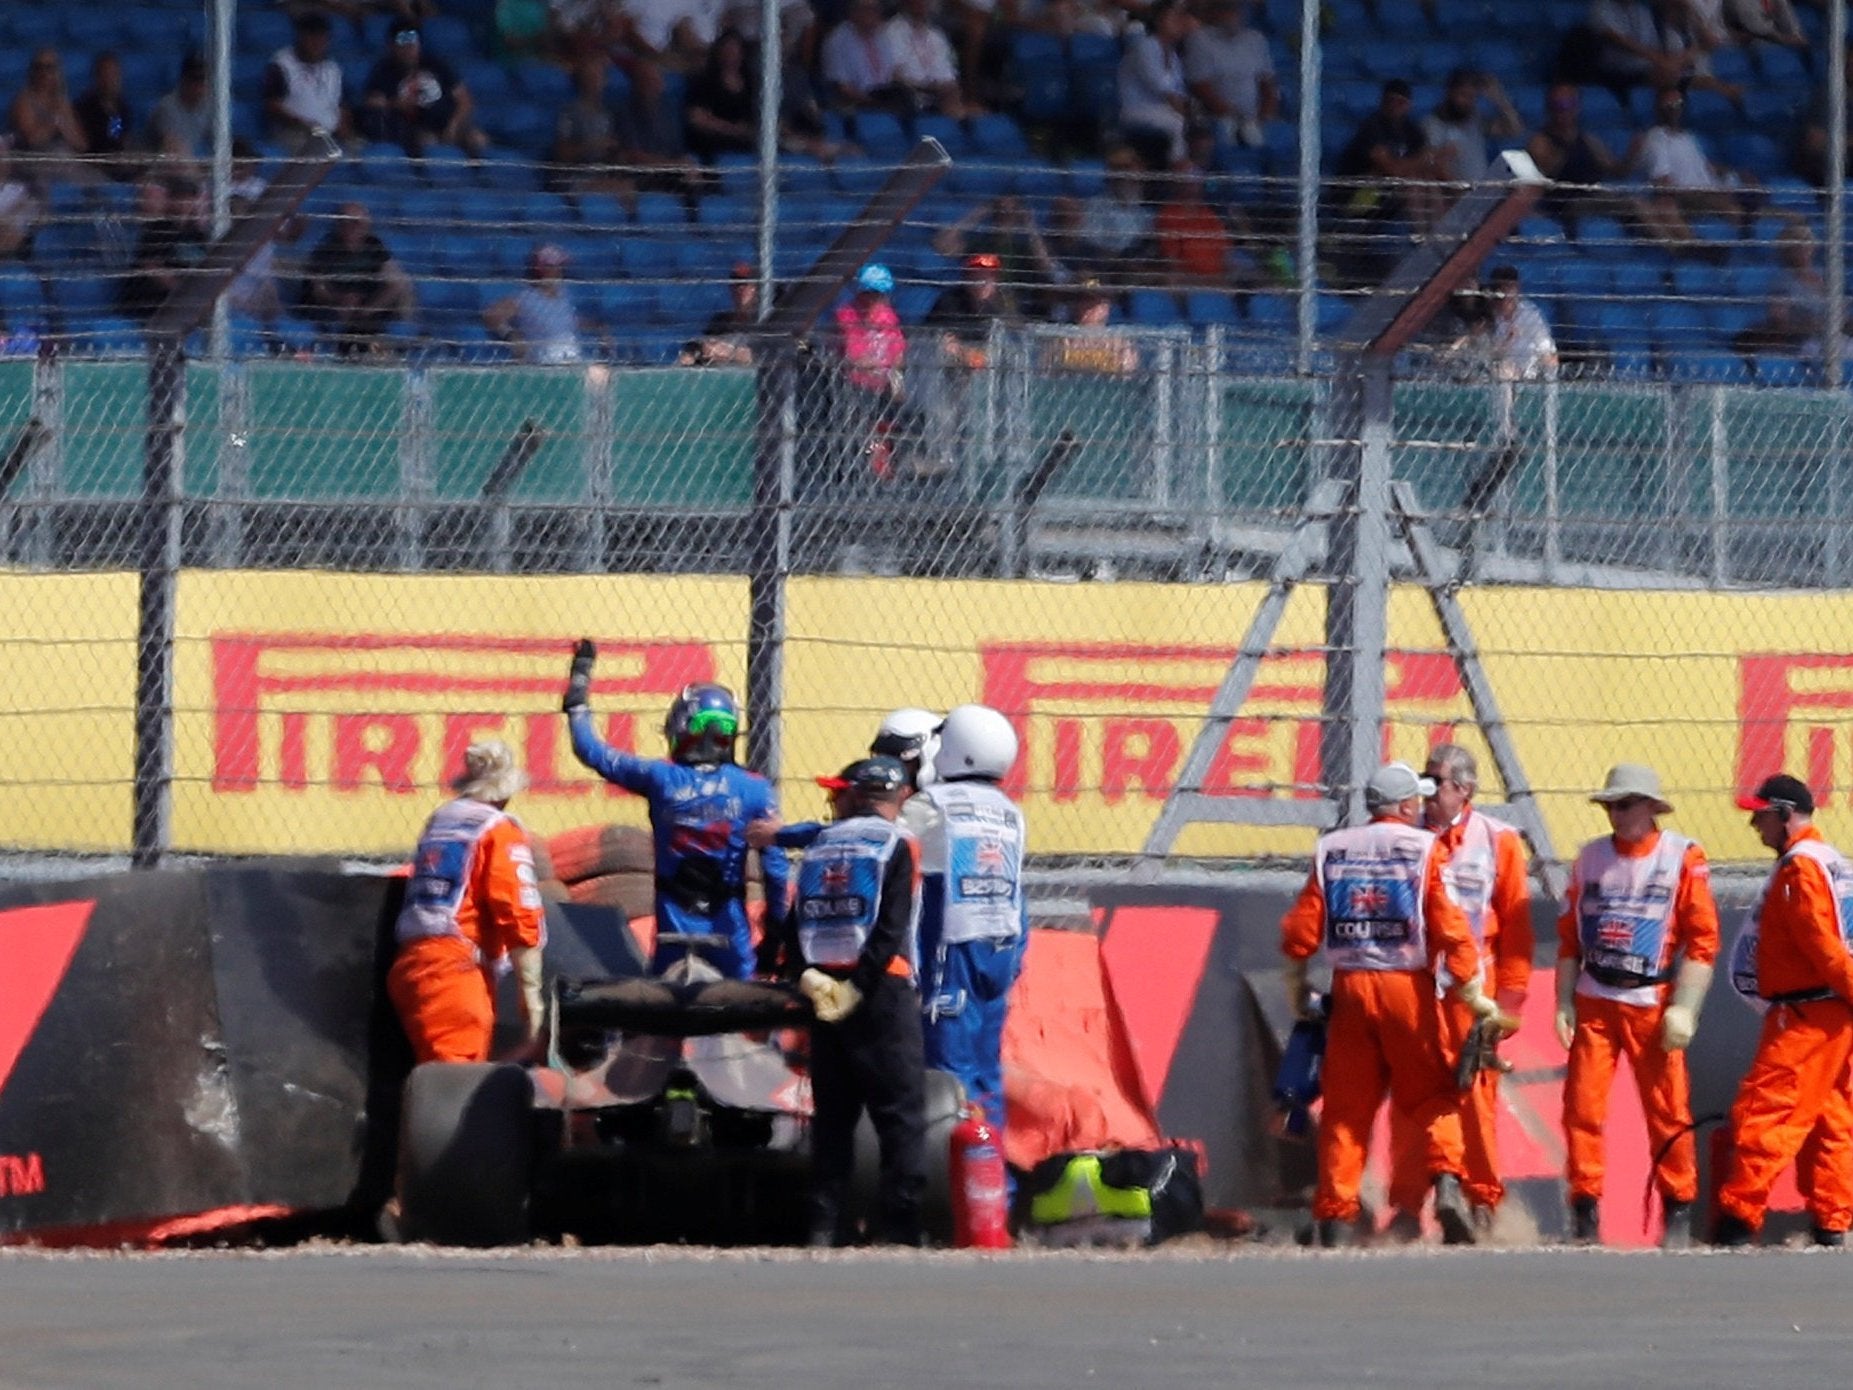 Brendon Hartley waves to the crowd after his big accident during third practice